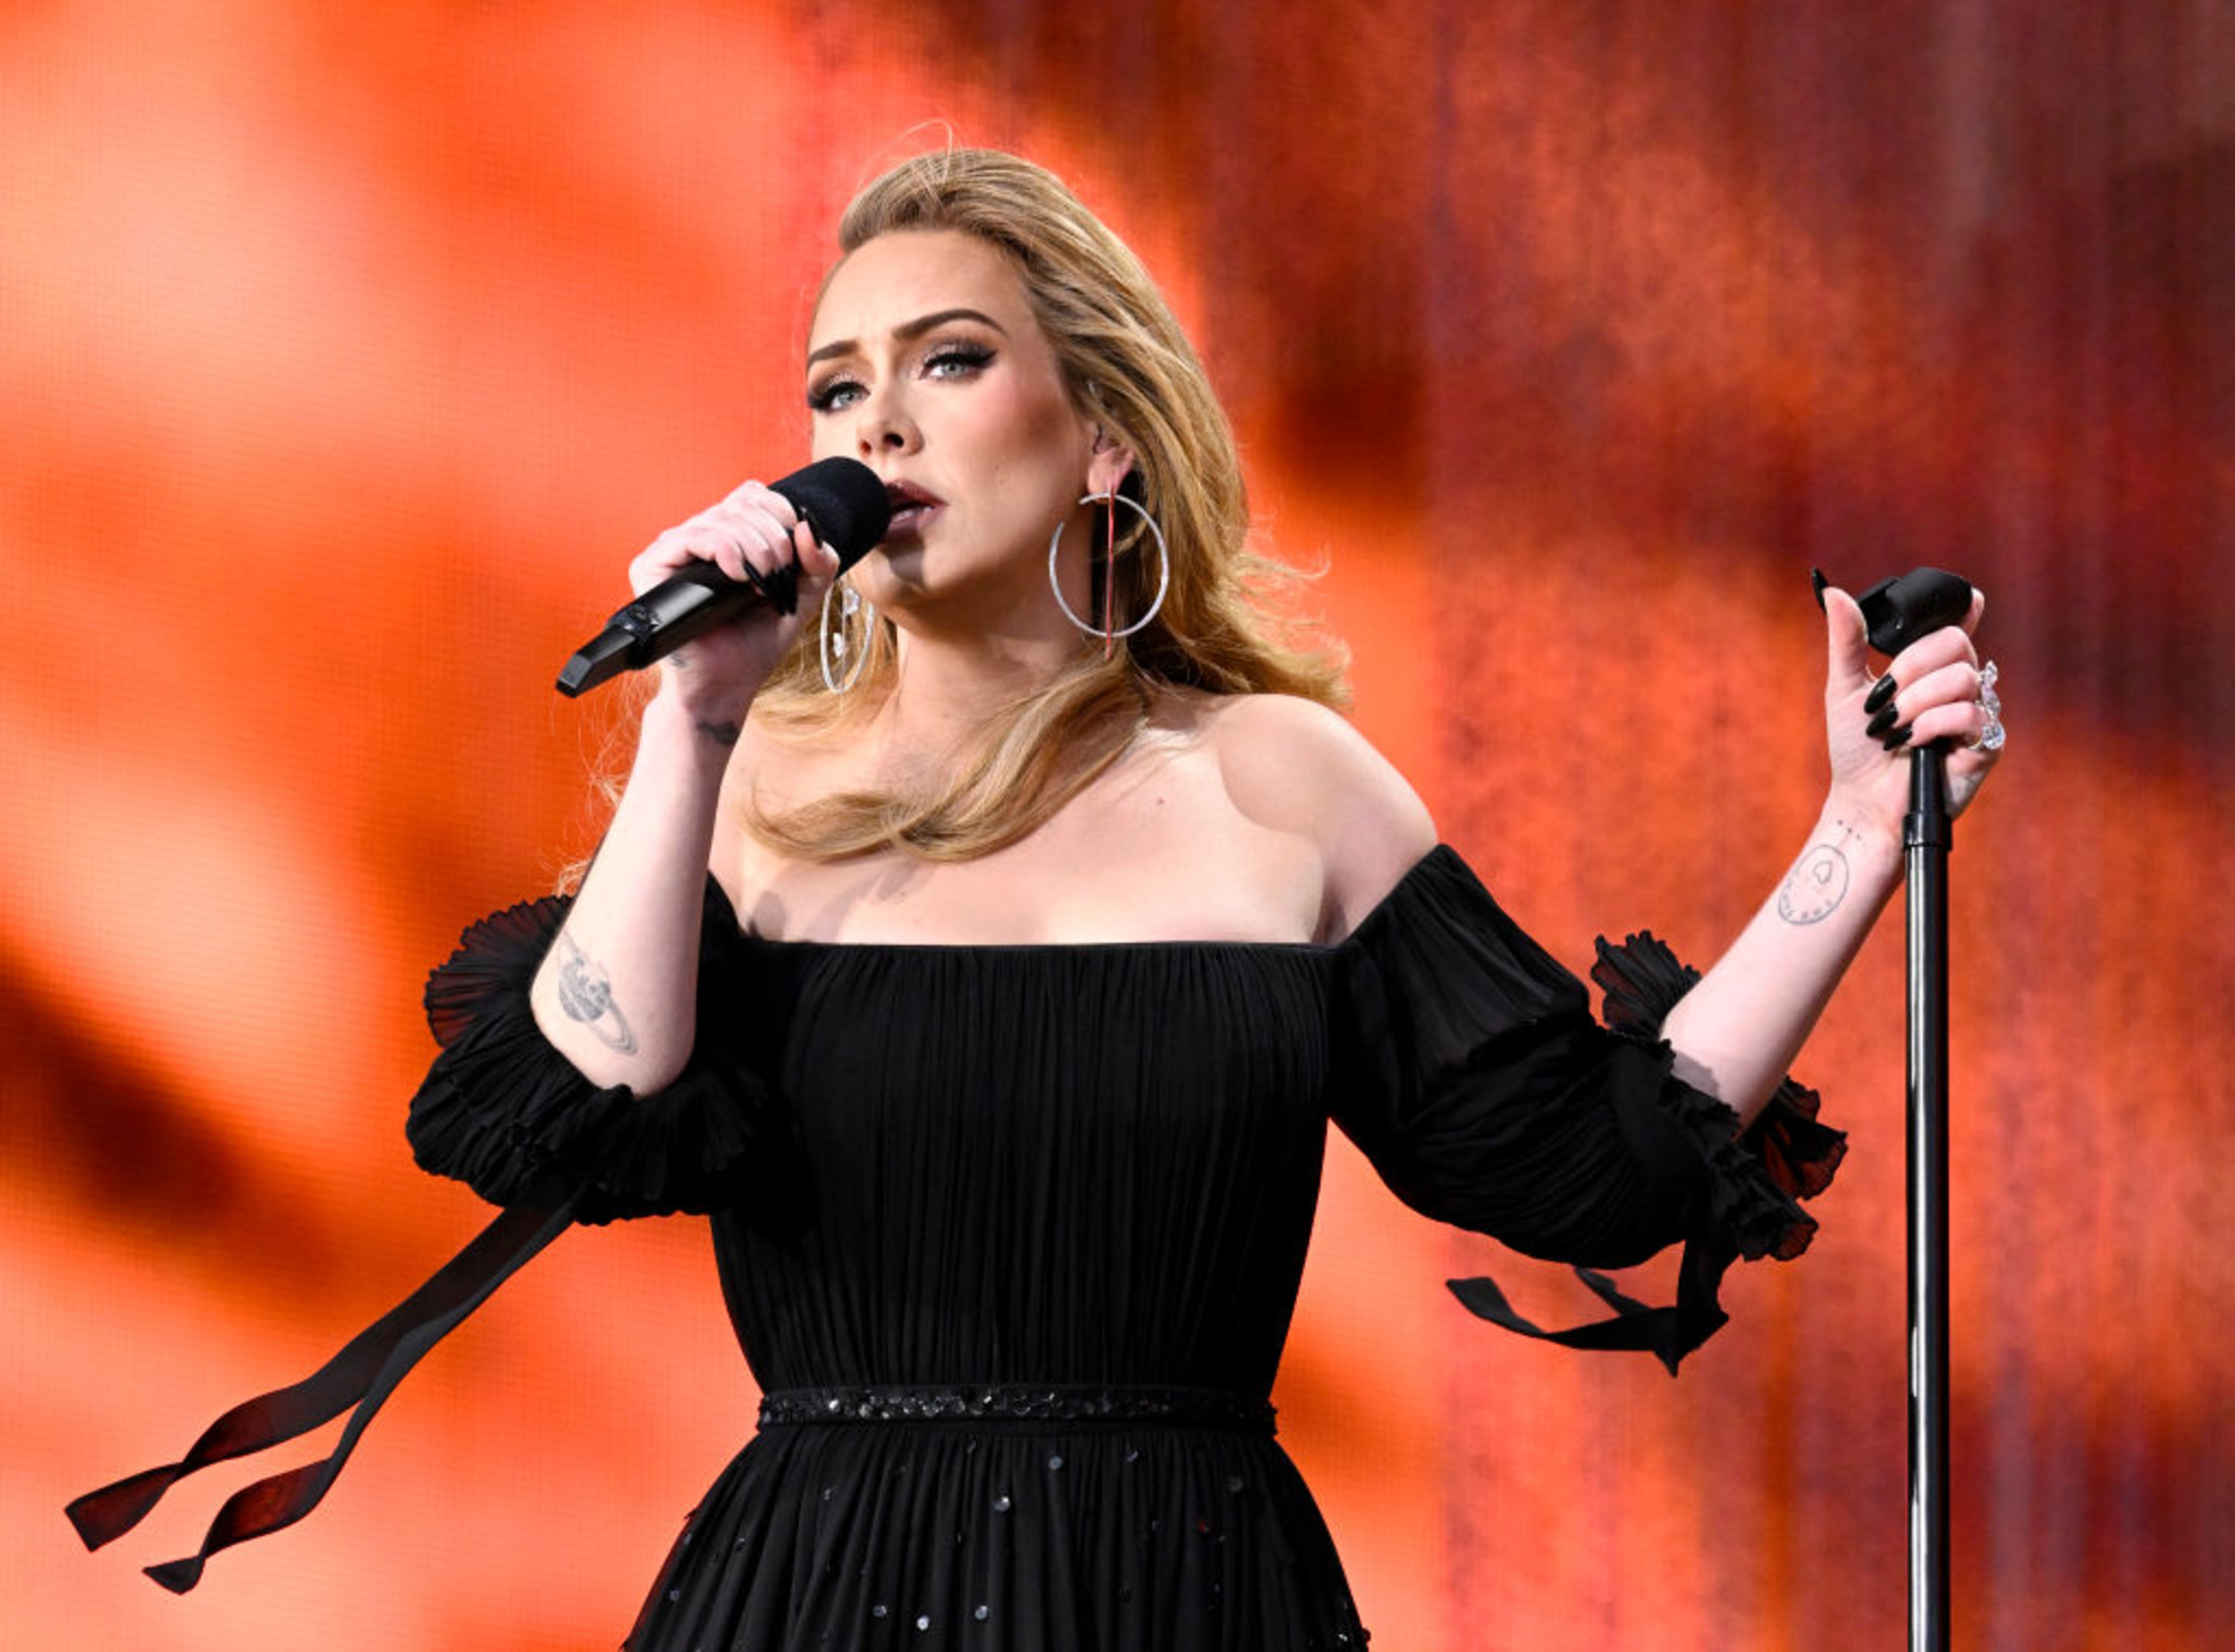 <p>Adele’s Las Vegas residency began back in late 2022, and her final shows in Sin City will end this year. Although tickets on Ticketmaster for her shows are currently sold out, fans can still snag tickets on secondary platforms like Vivid Seats and StubHub. The "Weekends with Adele" residency will have its final show on June 15th. </p><p>You may also like: <a href='https://www.yardbarker.com/entertainment/articles/17_most_memorable_country_music_one_hit_wonders_022924/s1__38322545'>17 most memorable country music one-hit wonders</a></p>